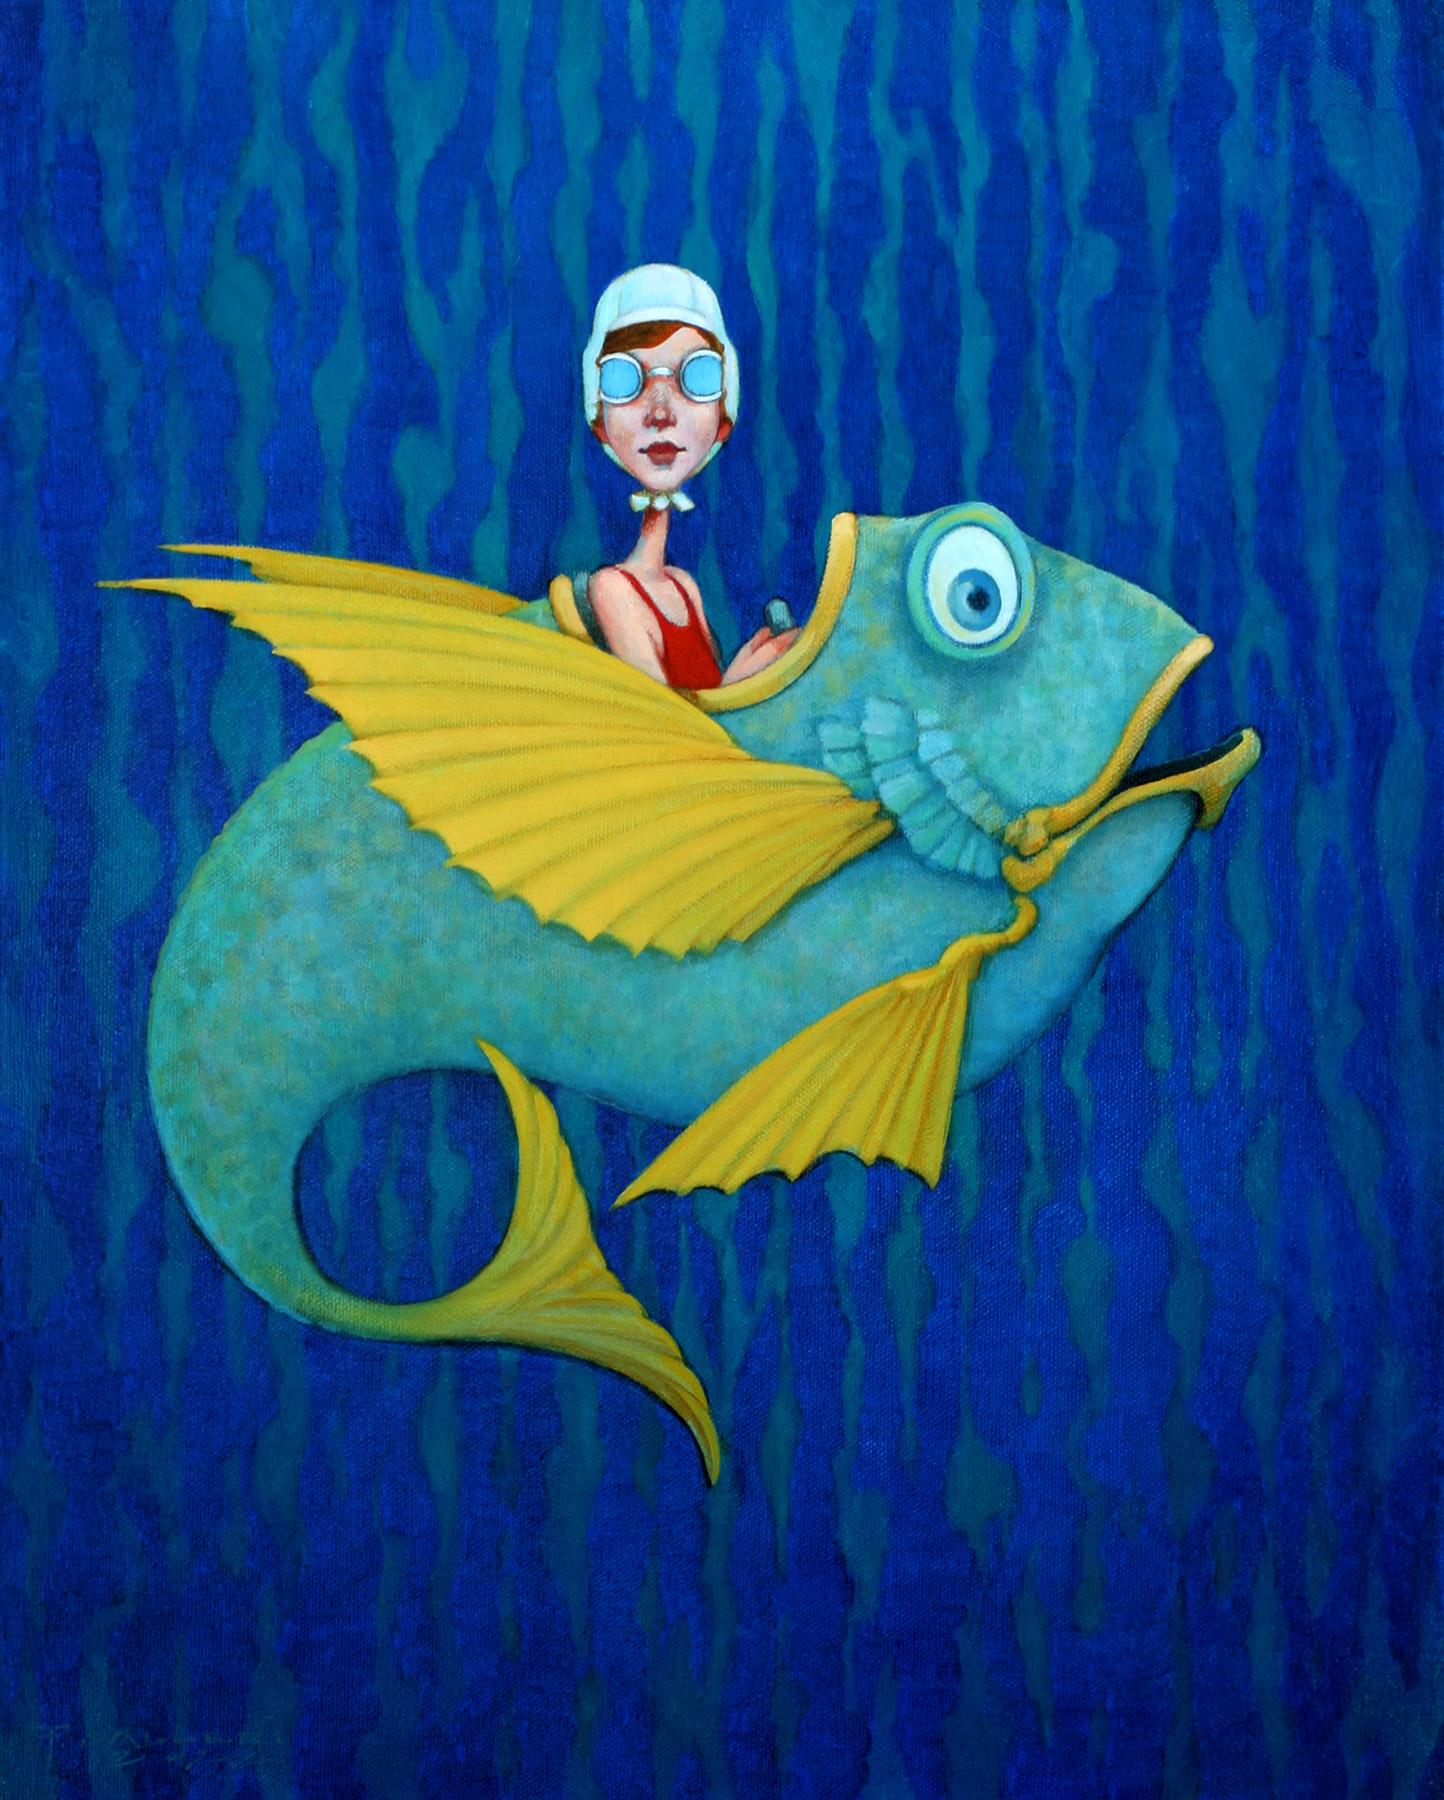 Fred Calleri Figurative Painting - "Atlantic Uber" Woman in red swimsuit, goggles in blue and yellow fish vehicle.